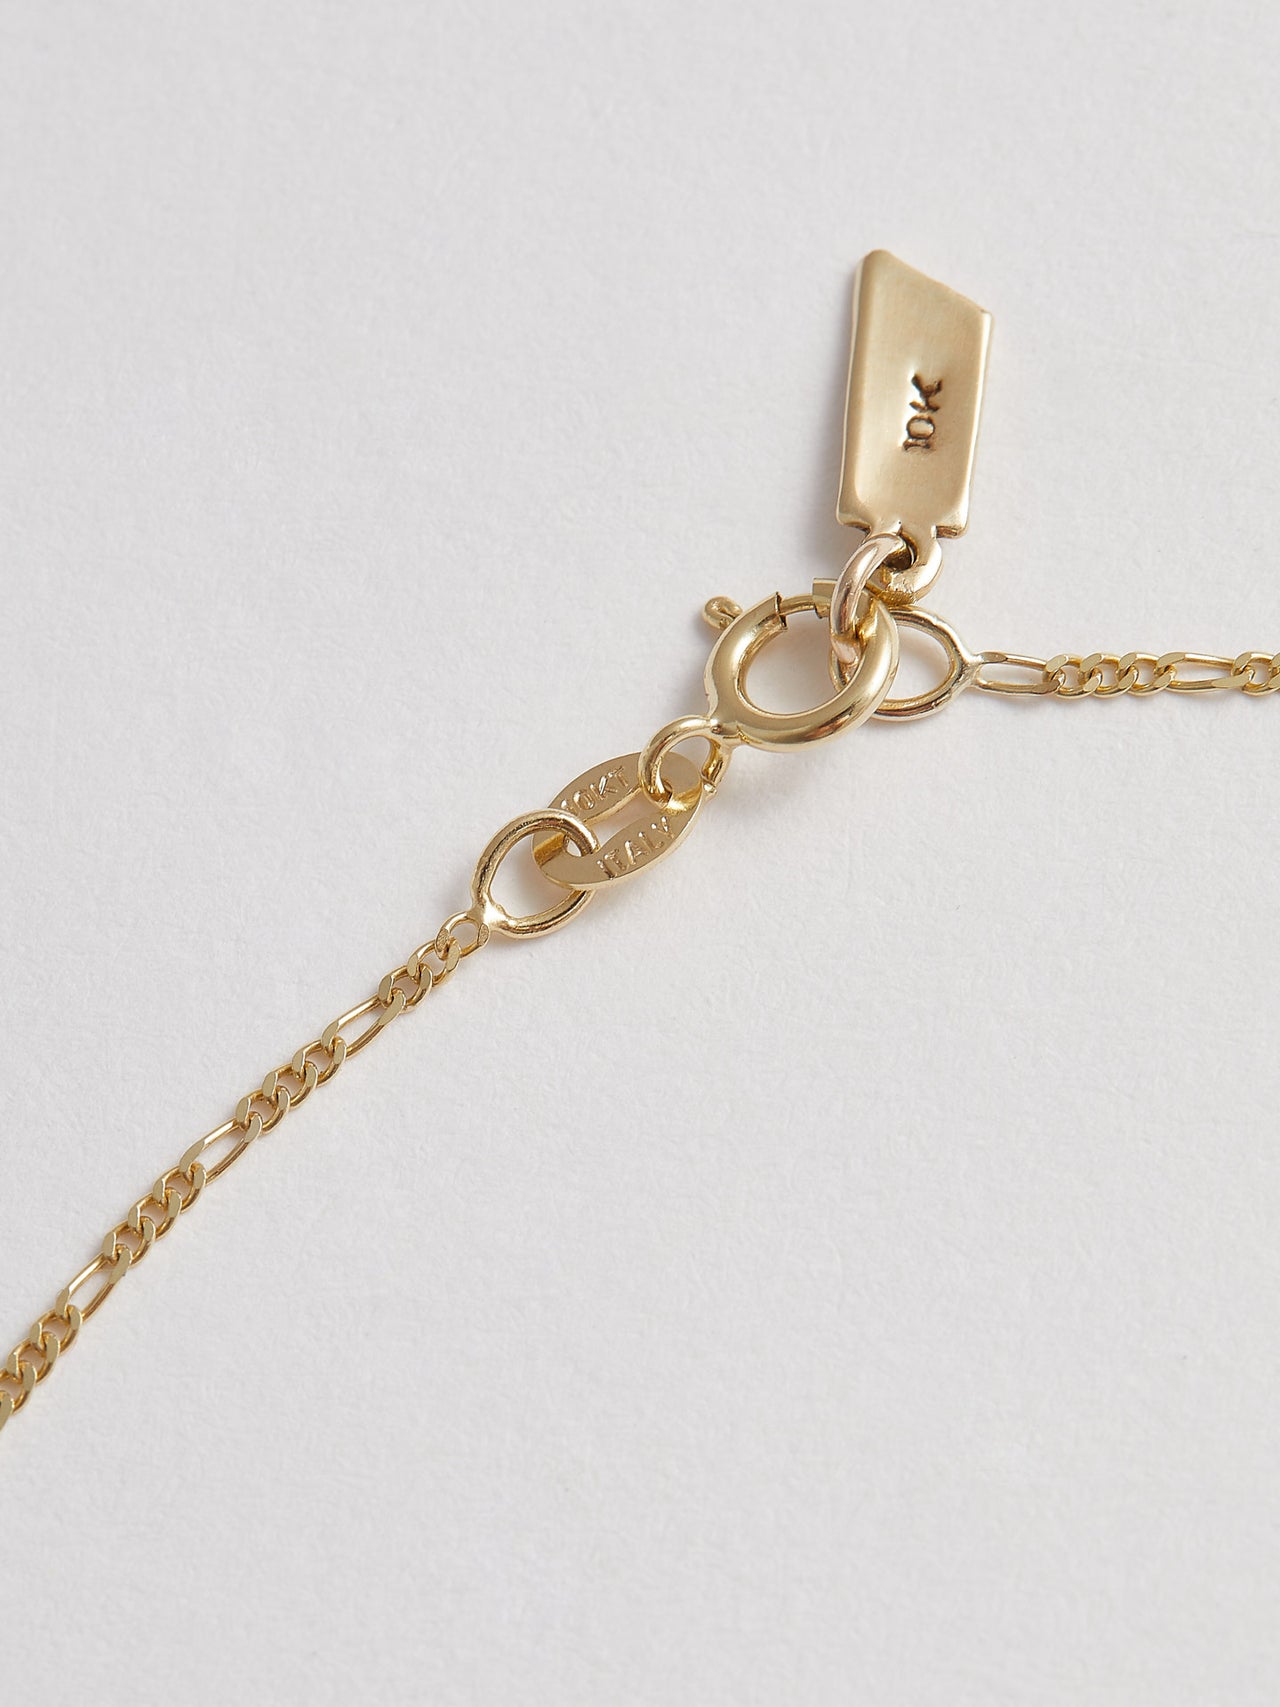 Close up product shot of the Baby Fig Chain Anklet closure (10kt Yellow Gold Figaro Chain Width: 1.3mm Thickness: 0.5mm Length: 10") Background: Grey backdrop